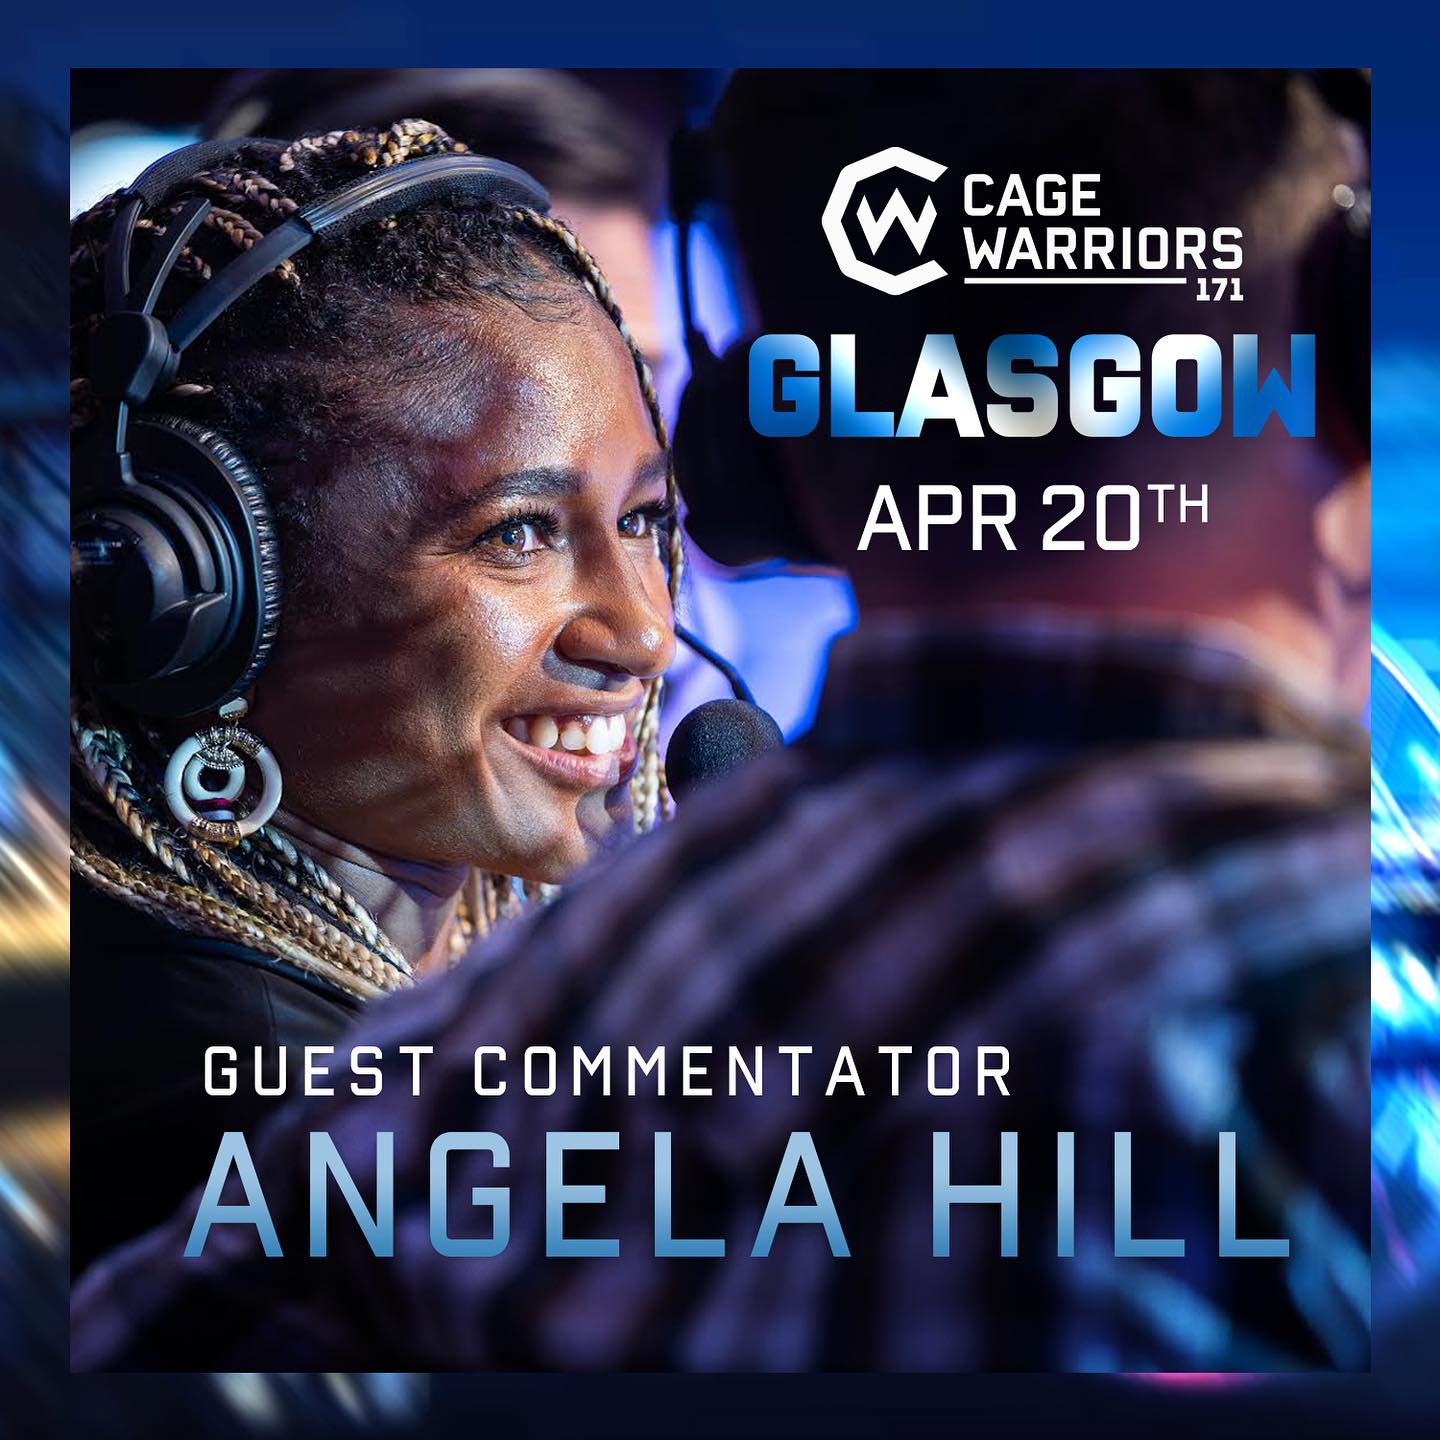 No tickets from @IanDeanUK? We got you @AngelaOverkill 😉

UFC vet @AngieOverkill is on the call for #CW171 Glasgow live on @UFCFightPass next Saturday! 🏴󠁧󠁢󠁳󠁣󠁴󠁿🎙️